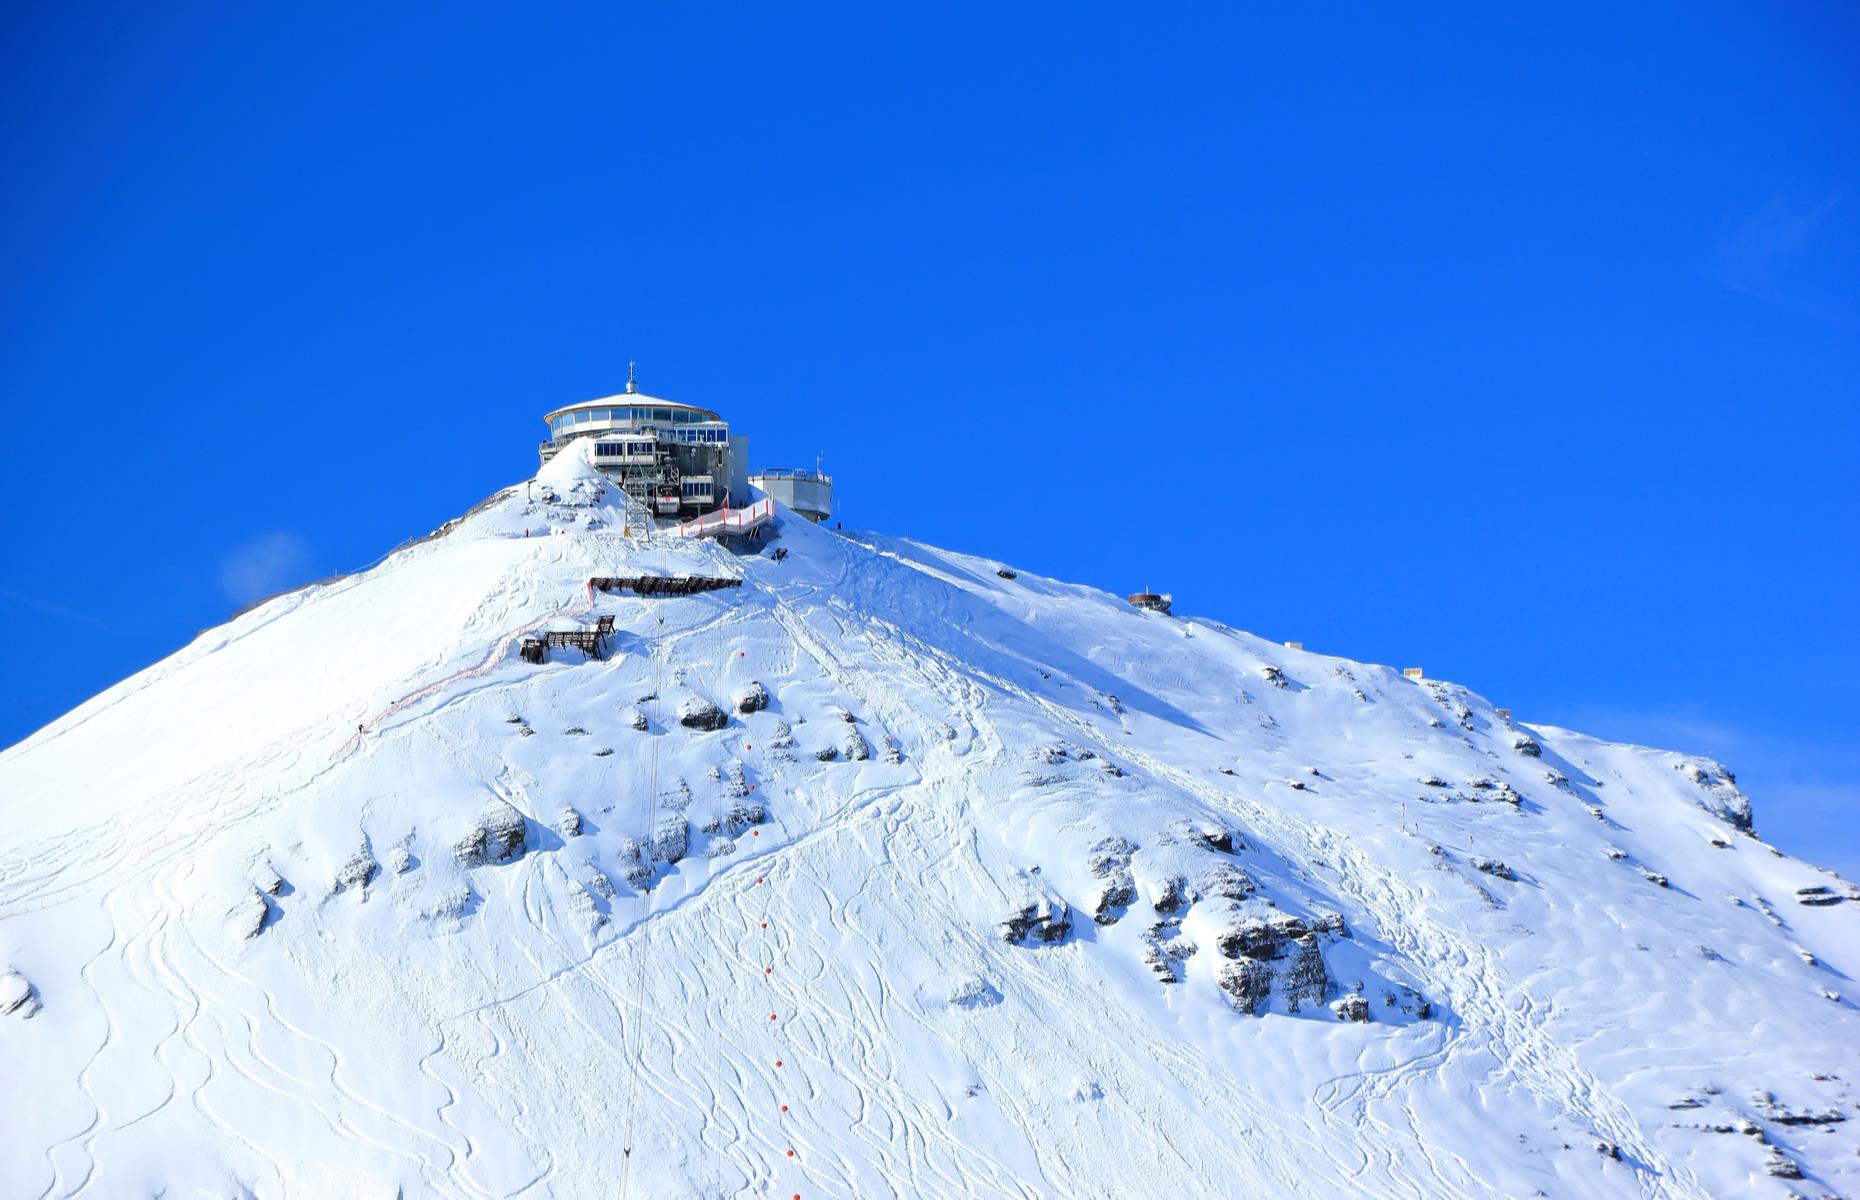 <p>With its mountain passes full of hair-pin bends and snowy slopes made for chase sequences, Switzerland is a prime location for action movies. As an offshore financial center to boot, the land-locked country makes a regular appearance in James Bond movies. Key settings include Piz Gloria, a revolving restaurant on Schilthorn's summit (pictured). It featured as arch-villain Ernst Stavro Blofeld’s lair in the 1969 film <em>On Her Majesty’s Secret Service </em>and today <a href="https://schilthorn.ch/5/en/360_deg_-Restaurant_Piz_Gloria">the mountain-top restaurant</a> has various themed menu items, a Bond museum and 007 trail.</p>